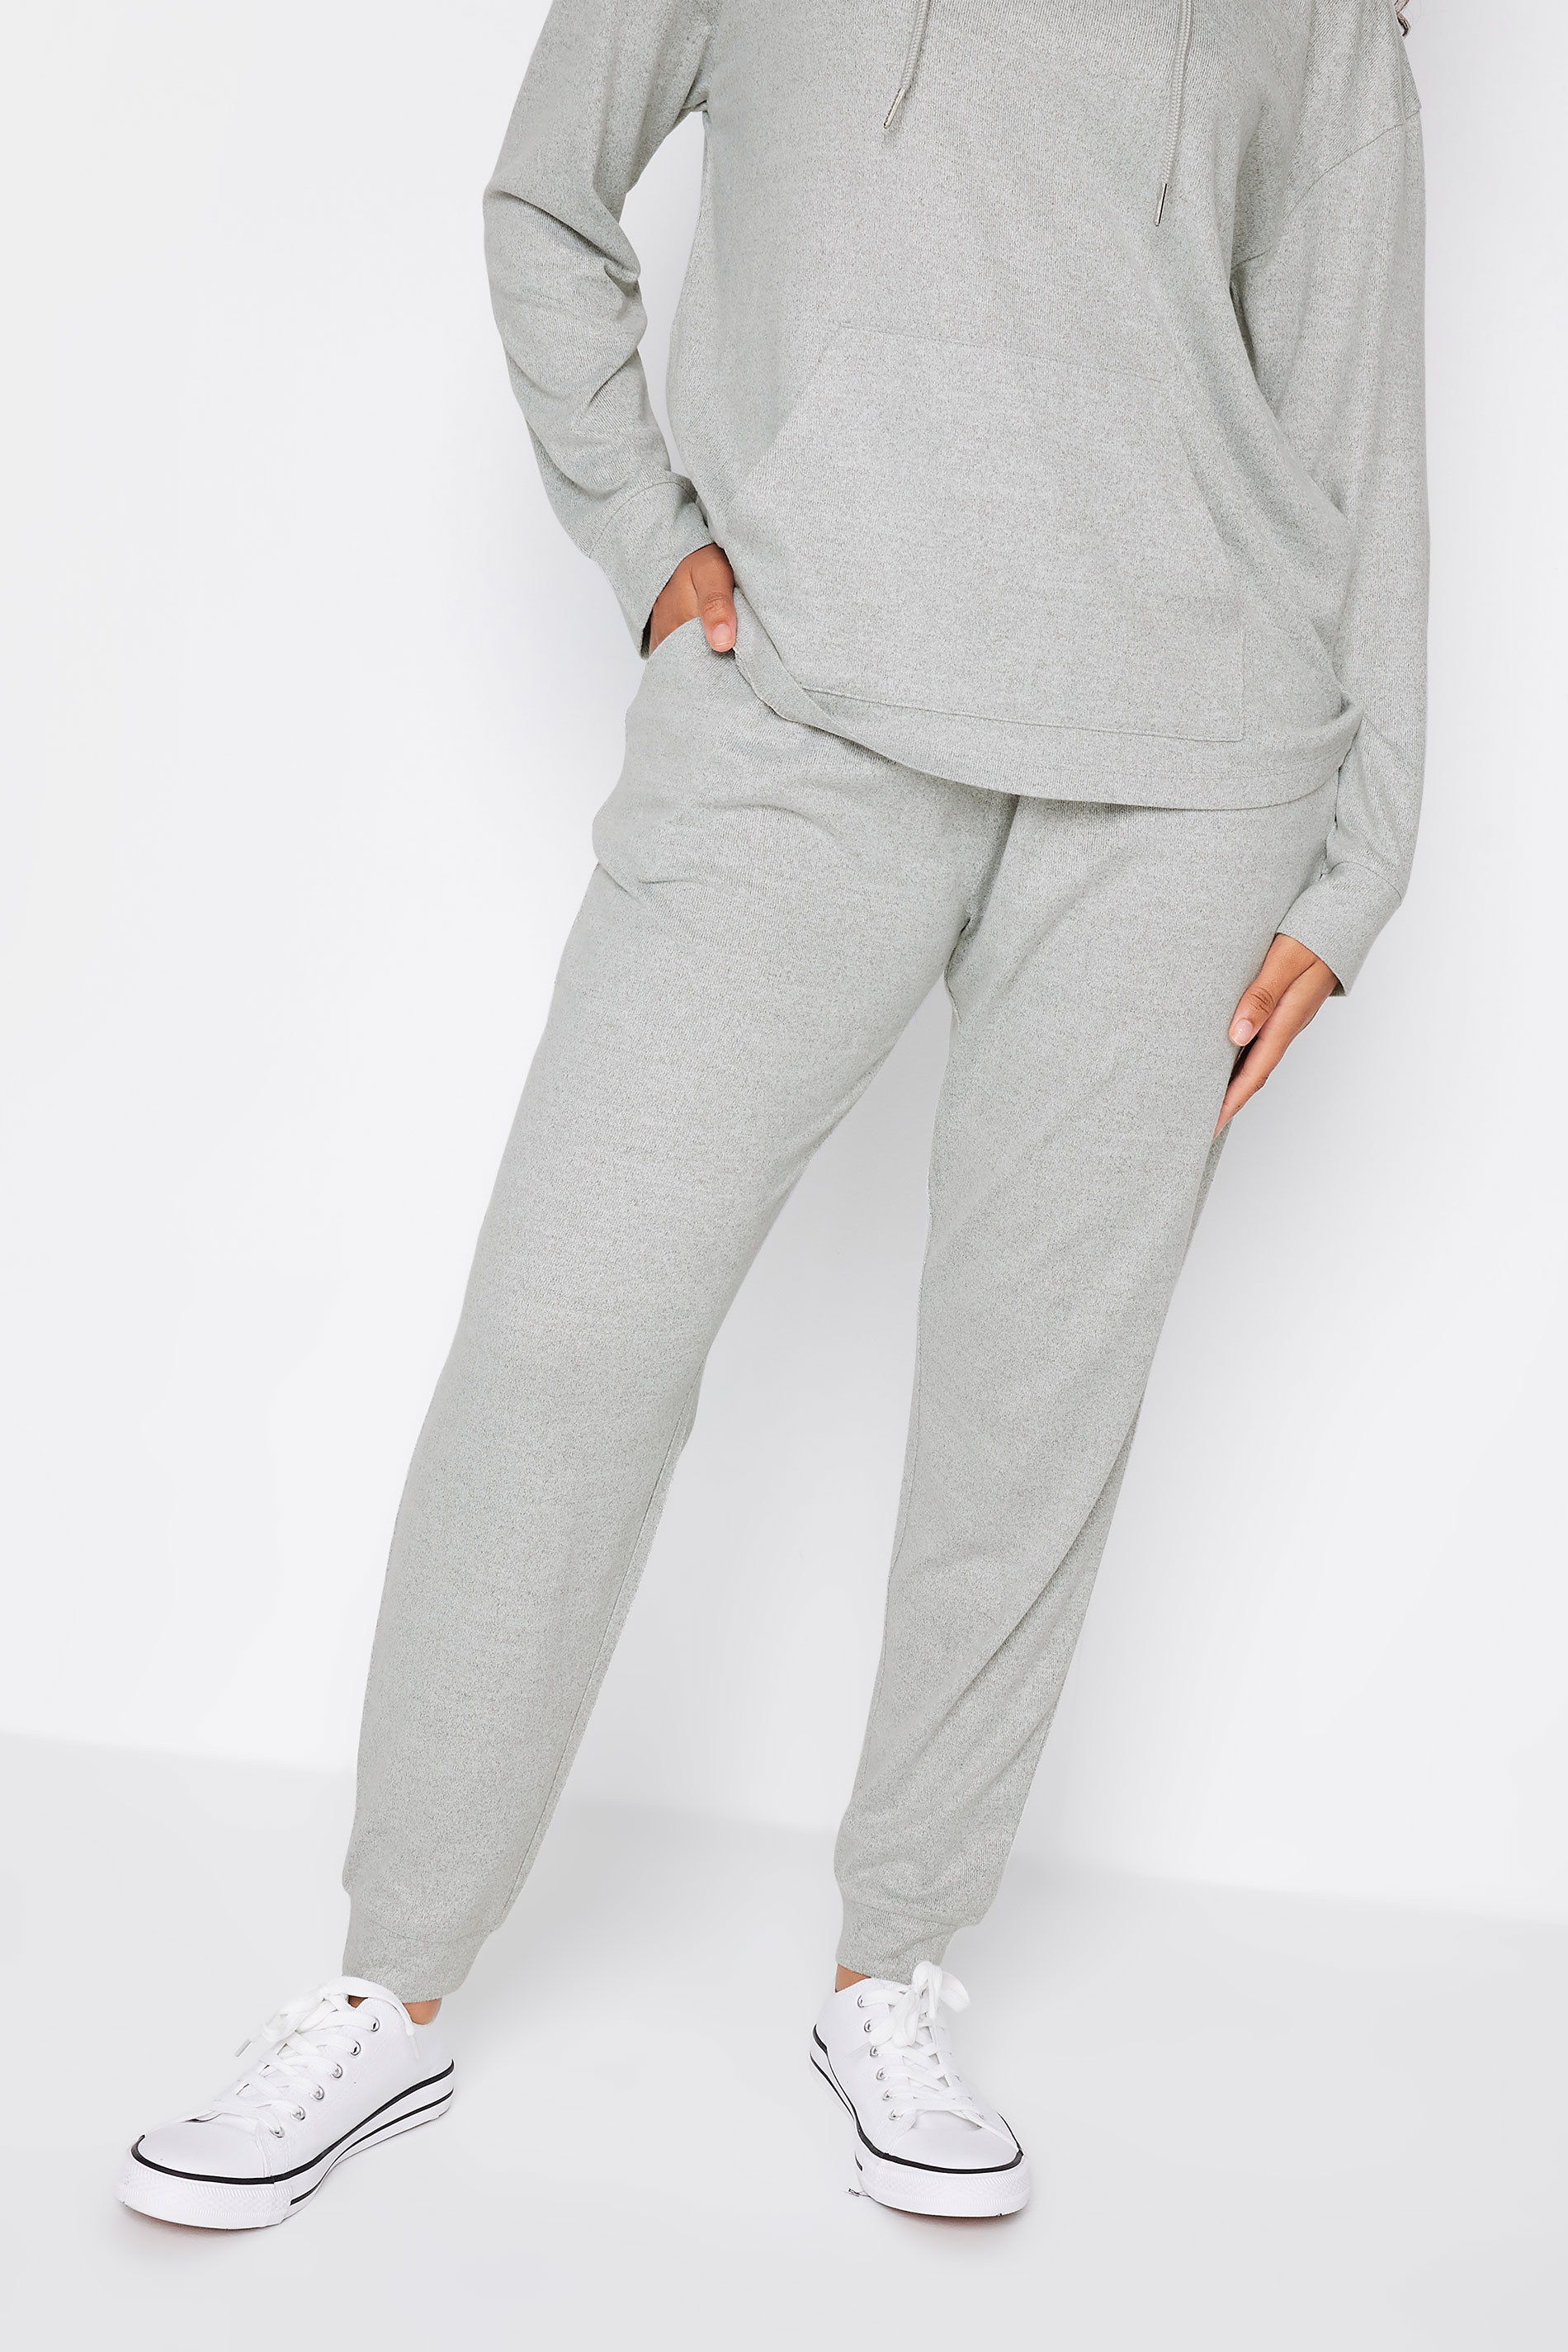 M&Co Grey Marl Soft Touch Lounge Joggers | M&Co 1